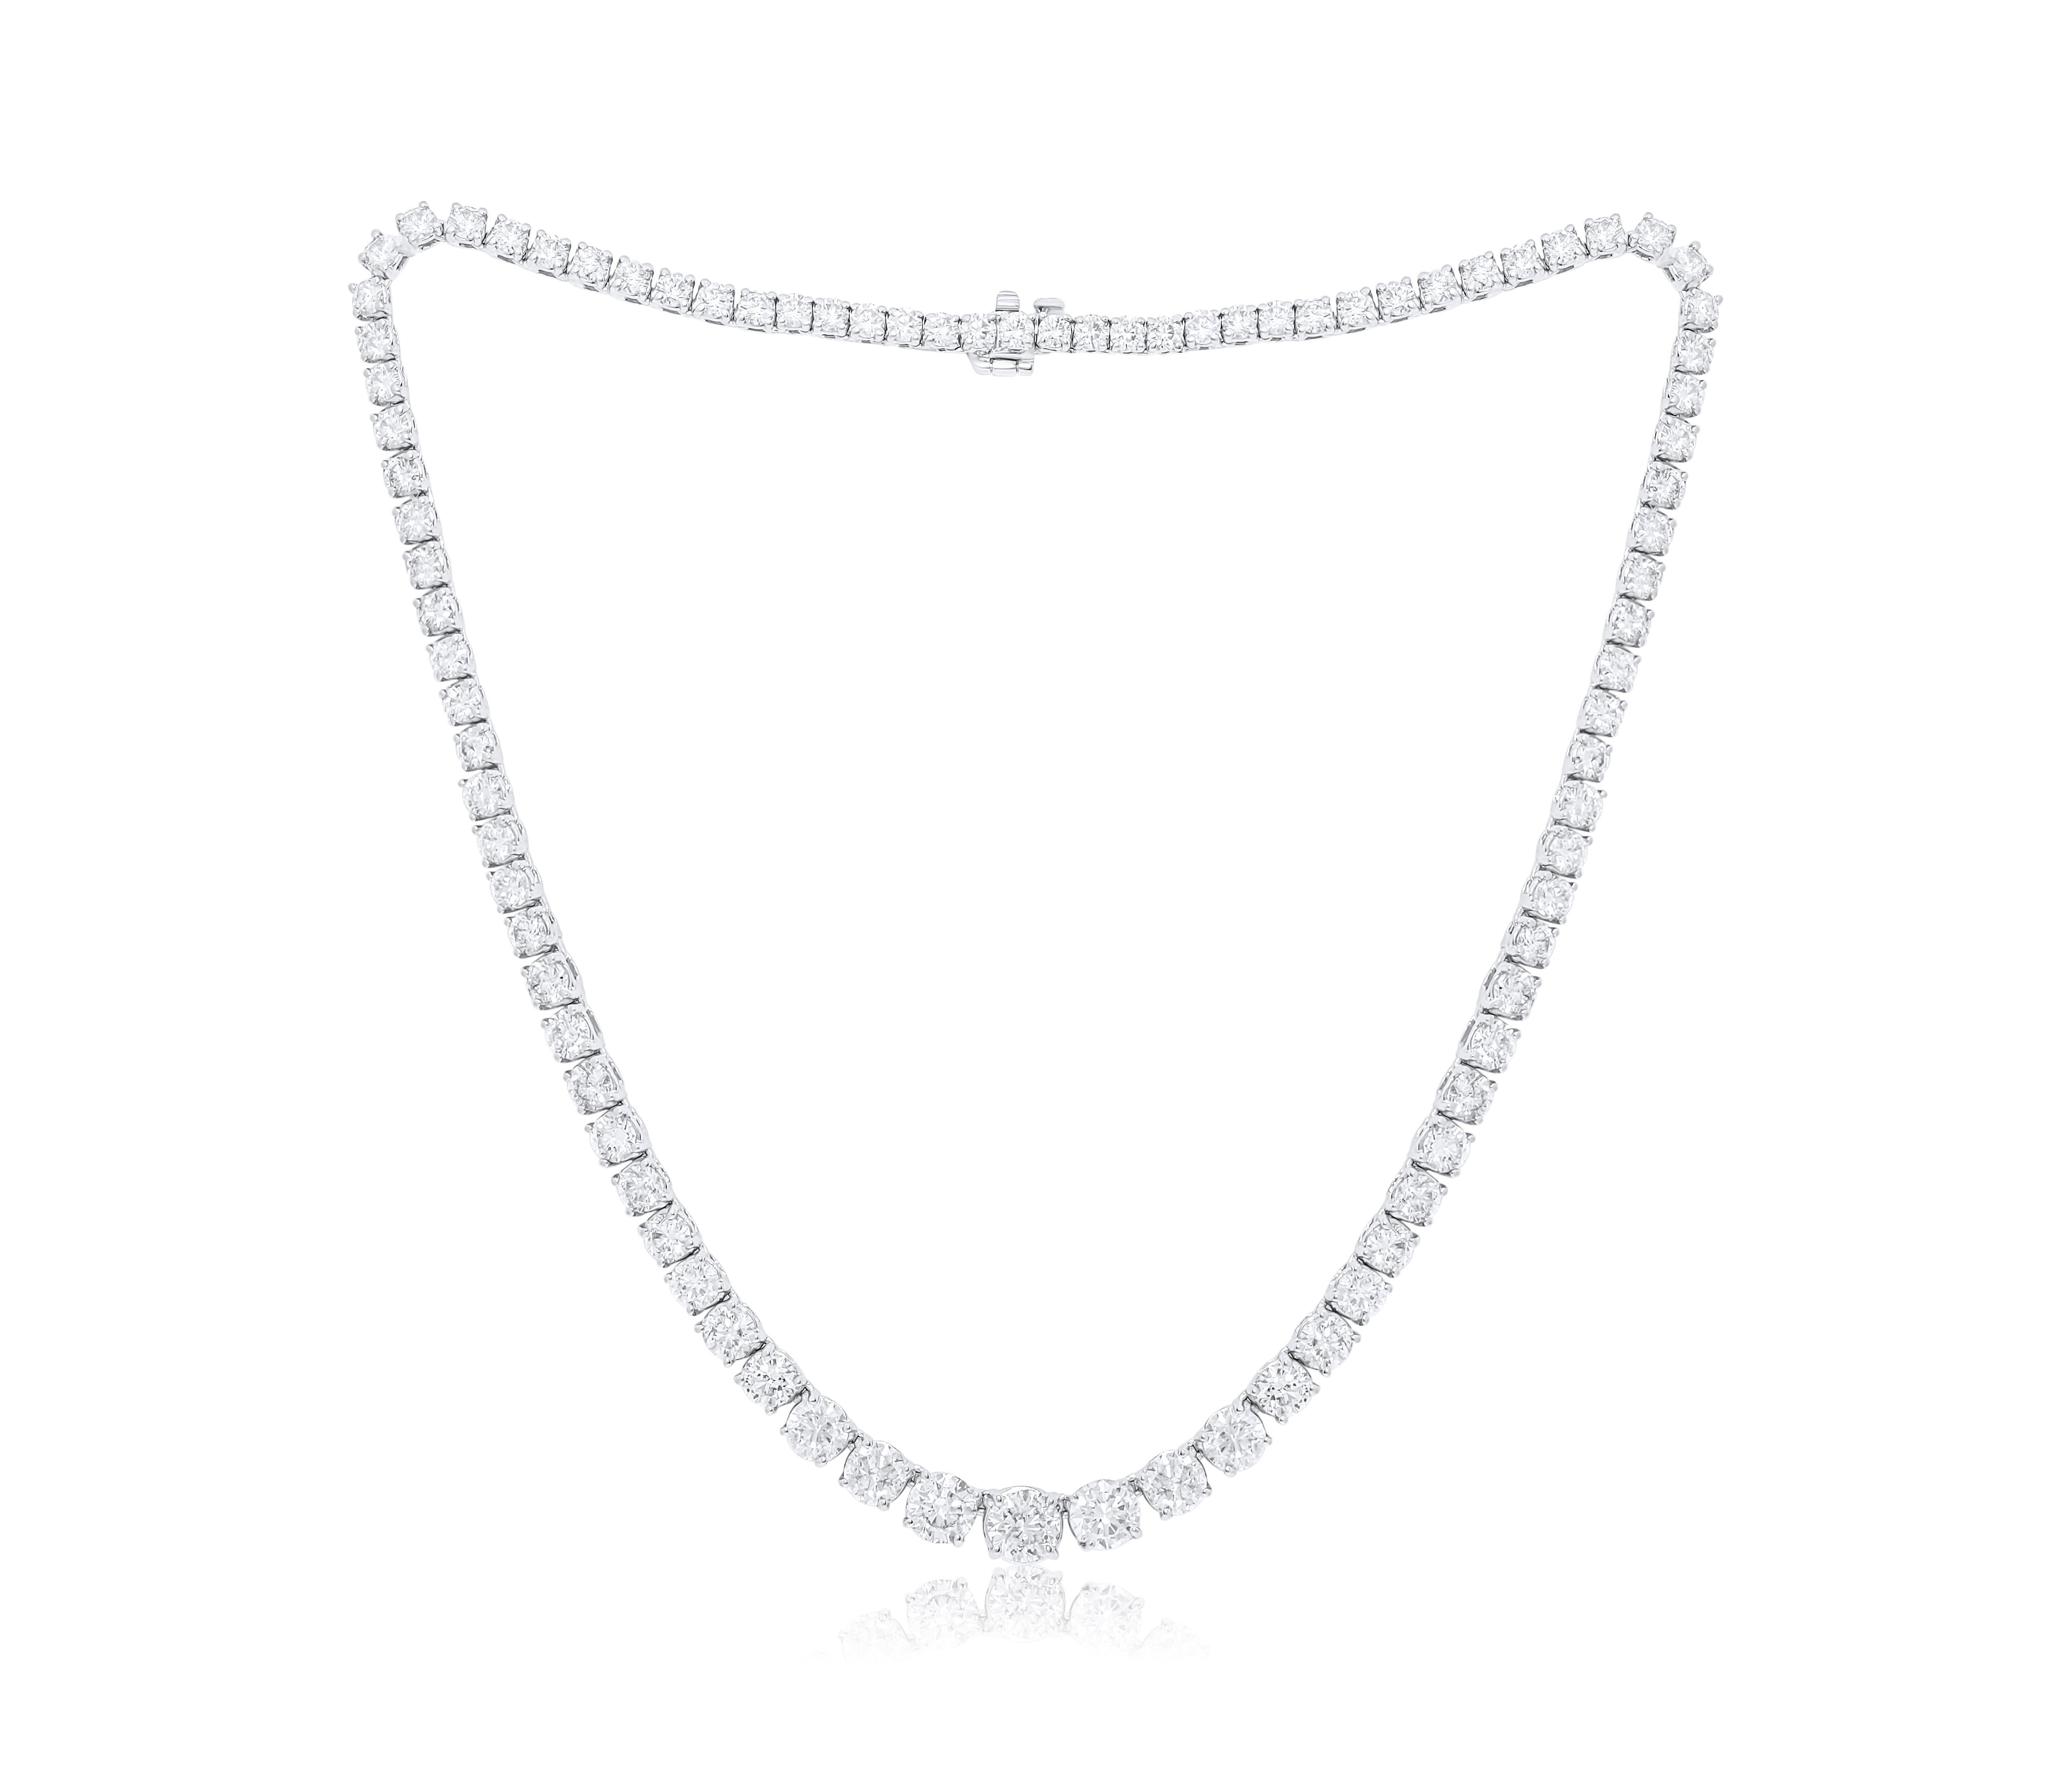 Round Cut Diana M. 14kt White Gold Graduated Reviera Tennis Necklace  20.00 cts 4 prong For Sale